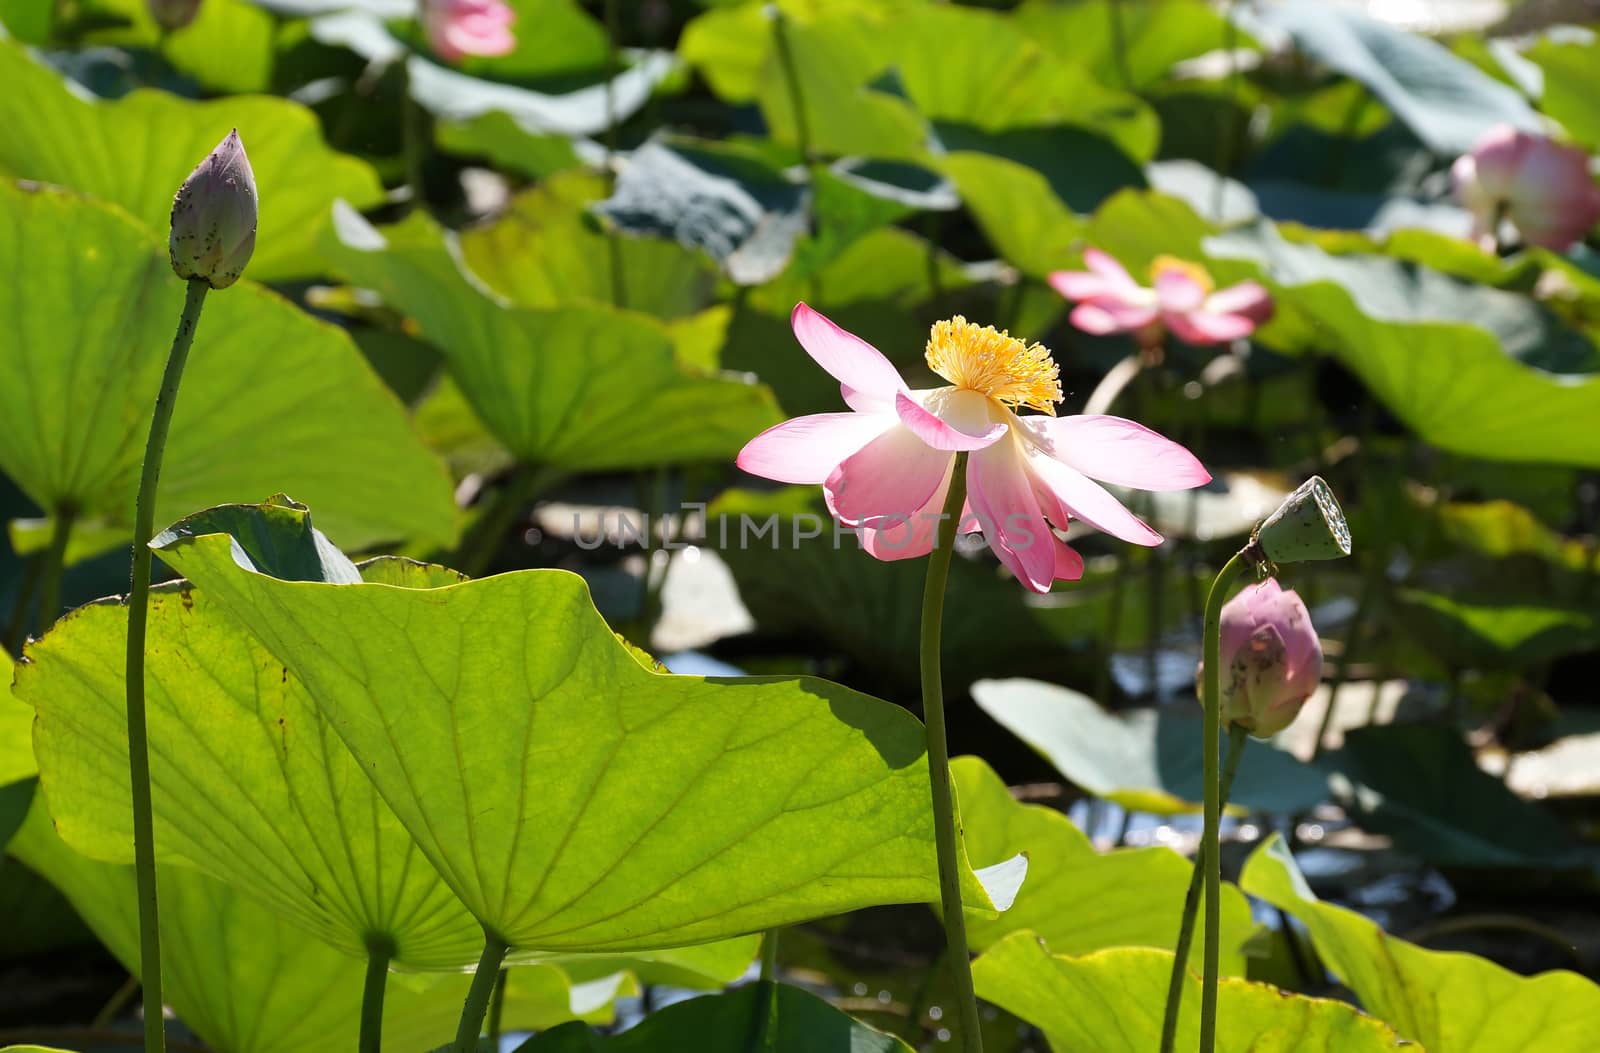 Lotus flower on the lake in a flood plain of the Volga River by Vadimdem